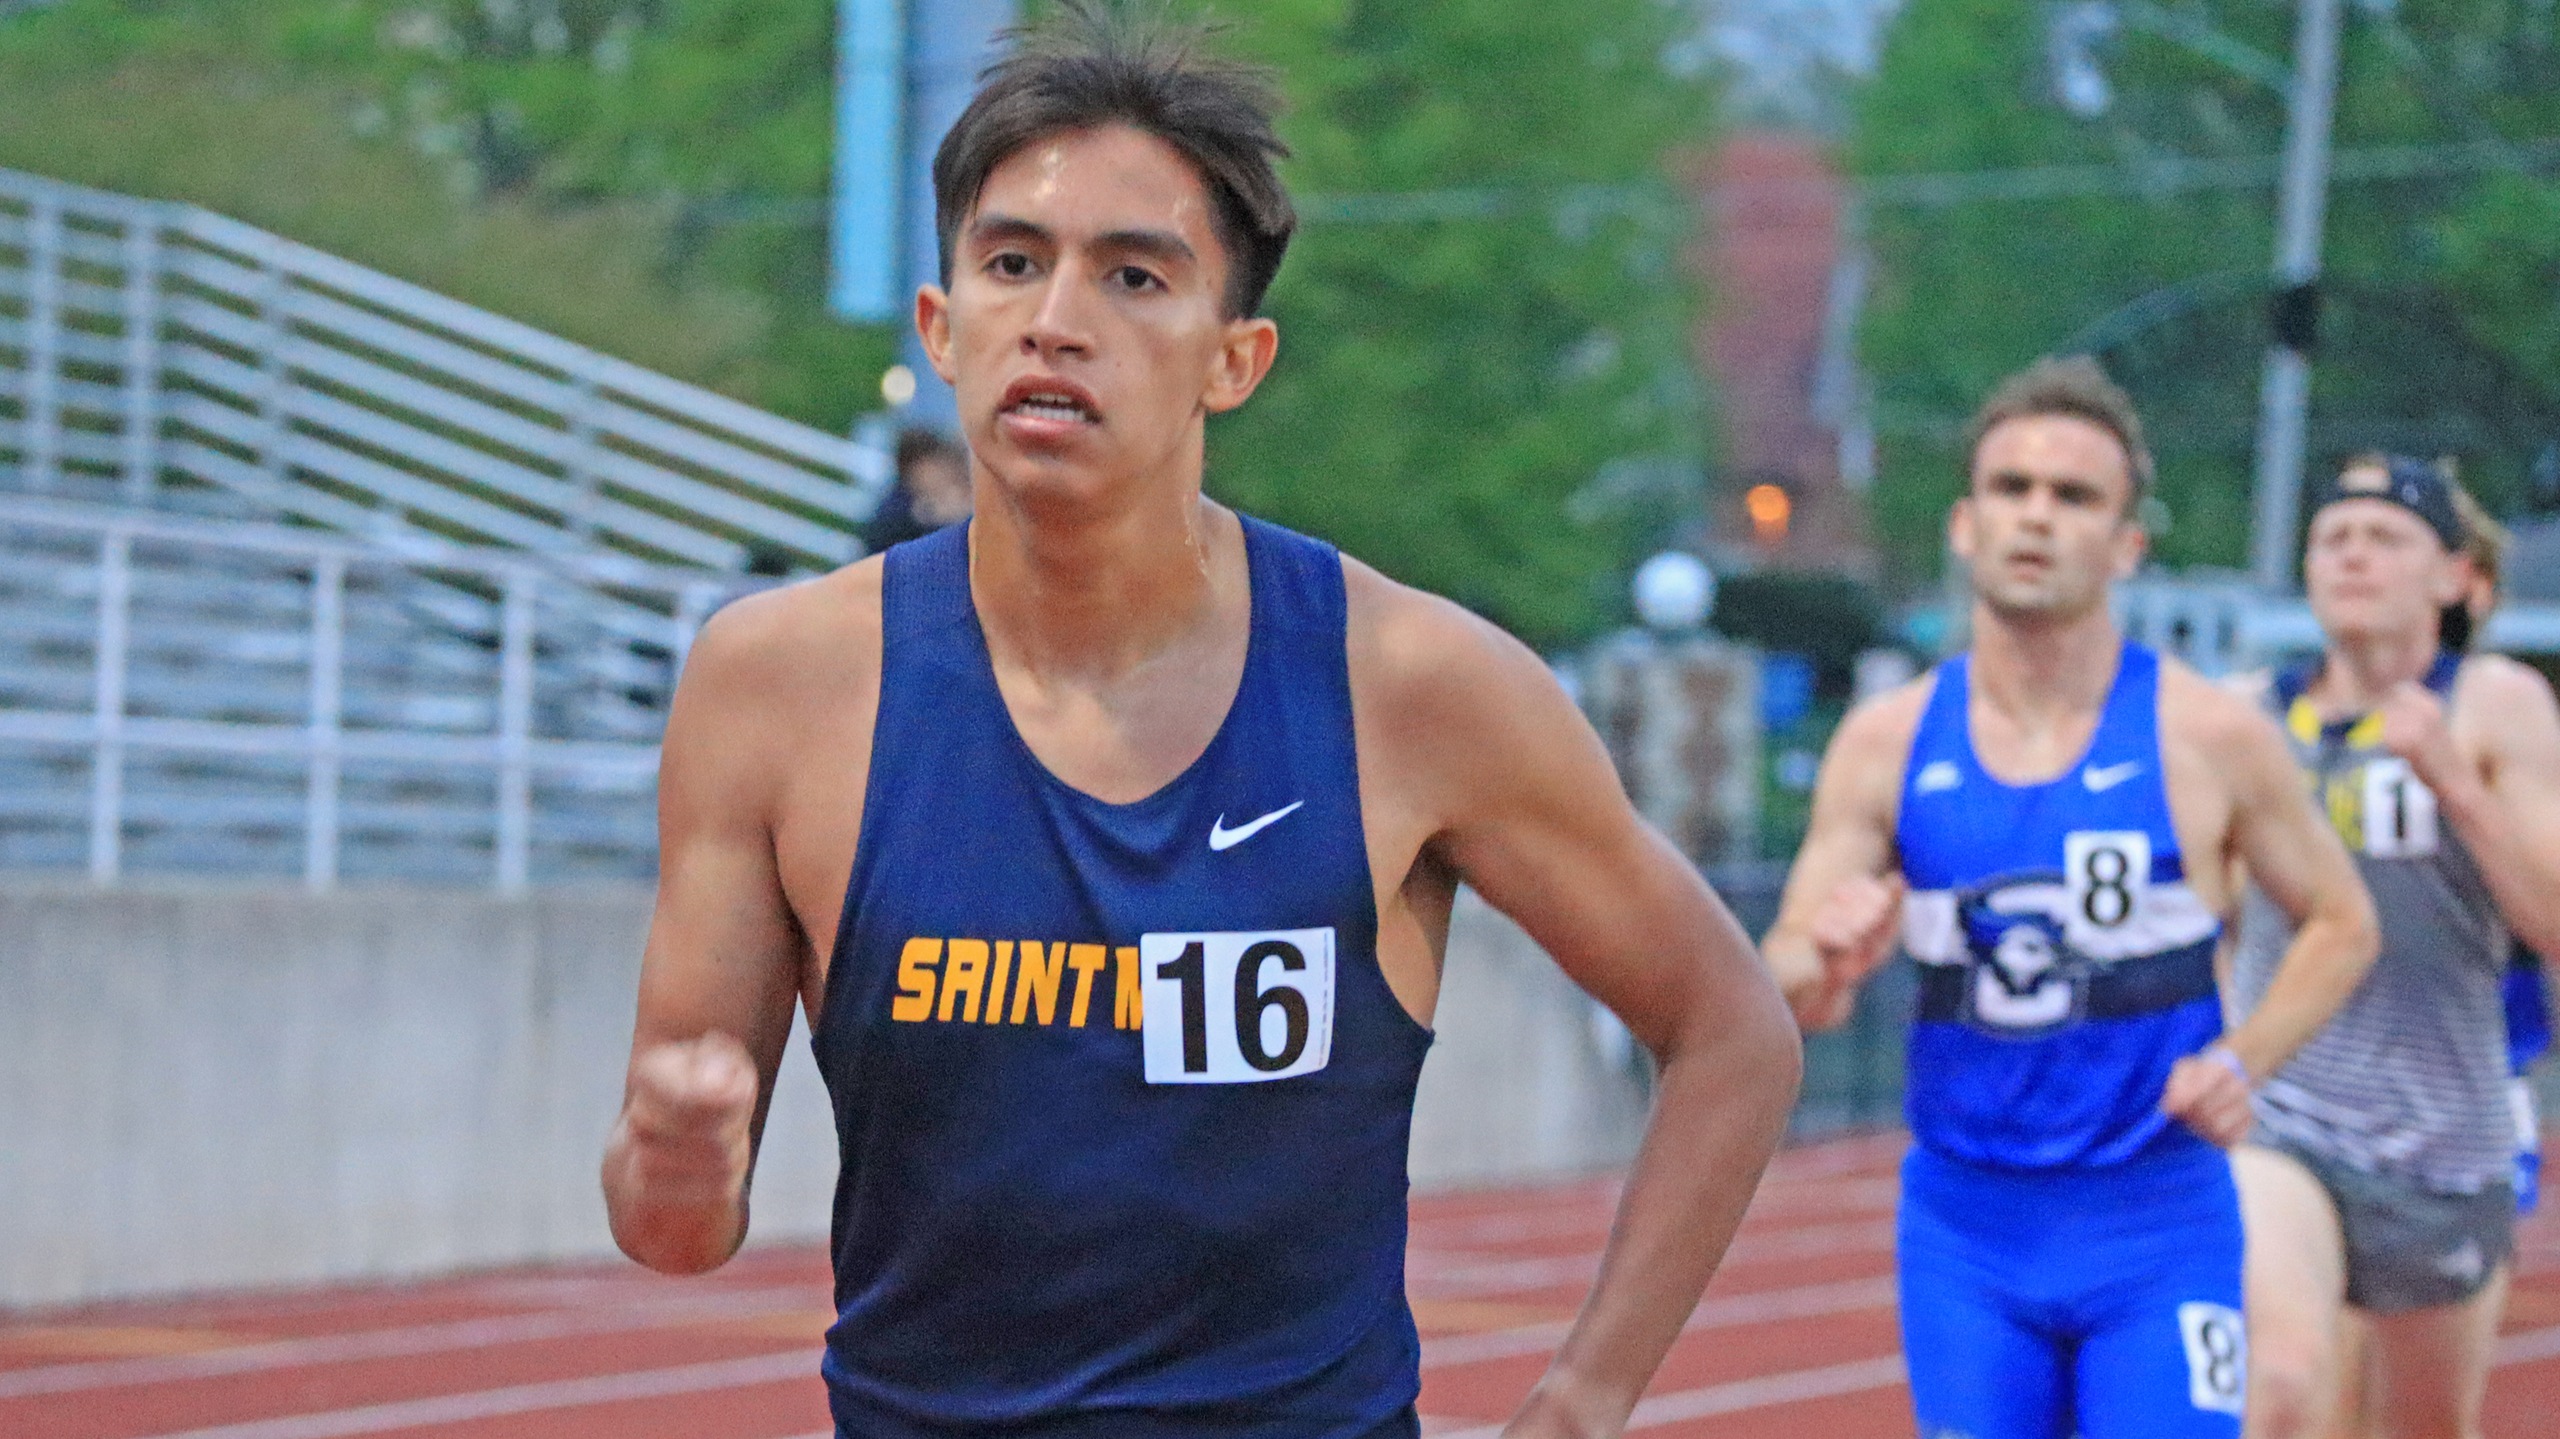 Spires Hit Multiple NAIA Standards Over the Weekend